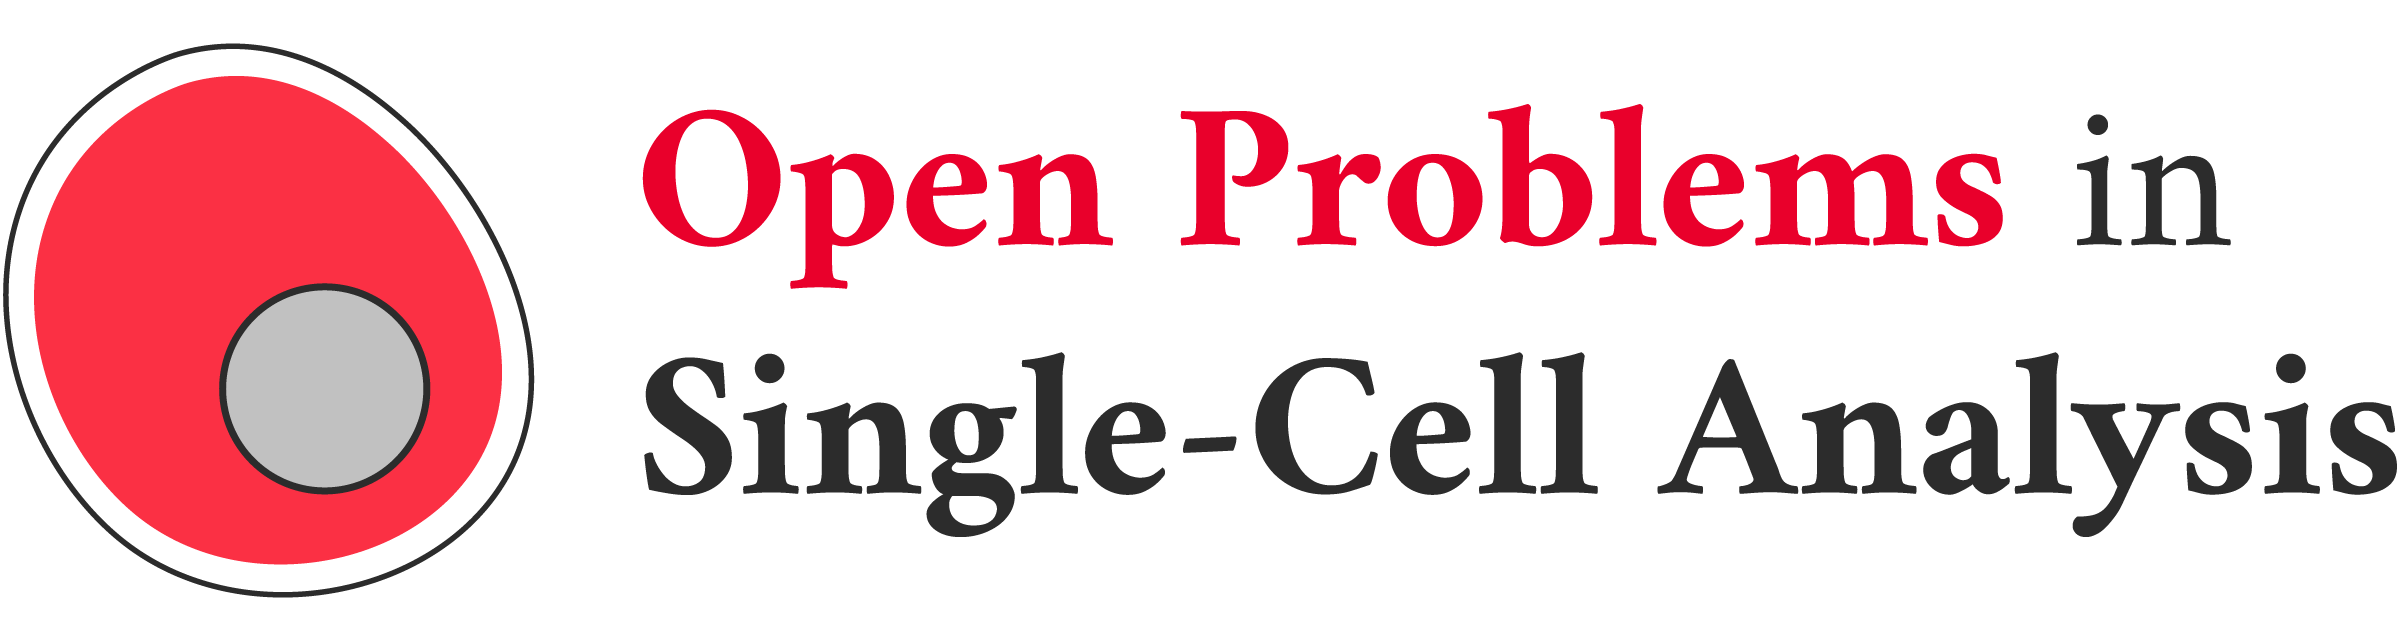 Open Problems in Single-Cell Analysis